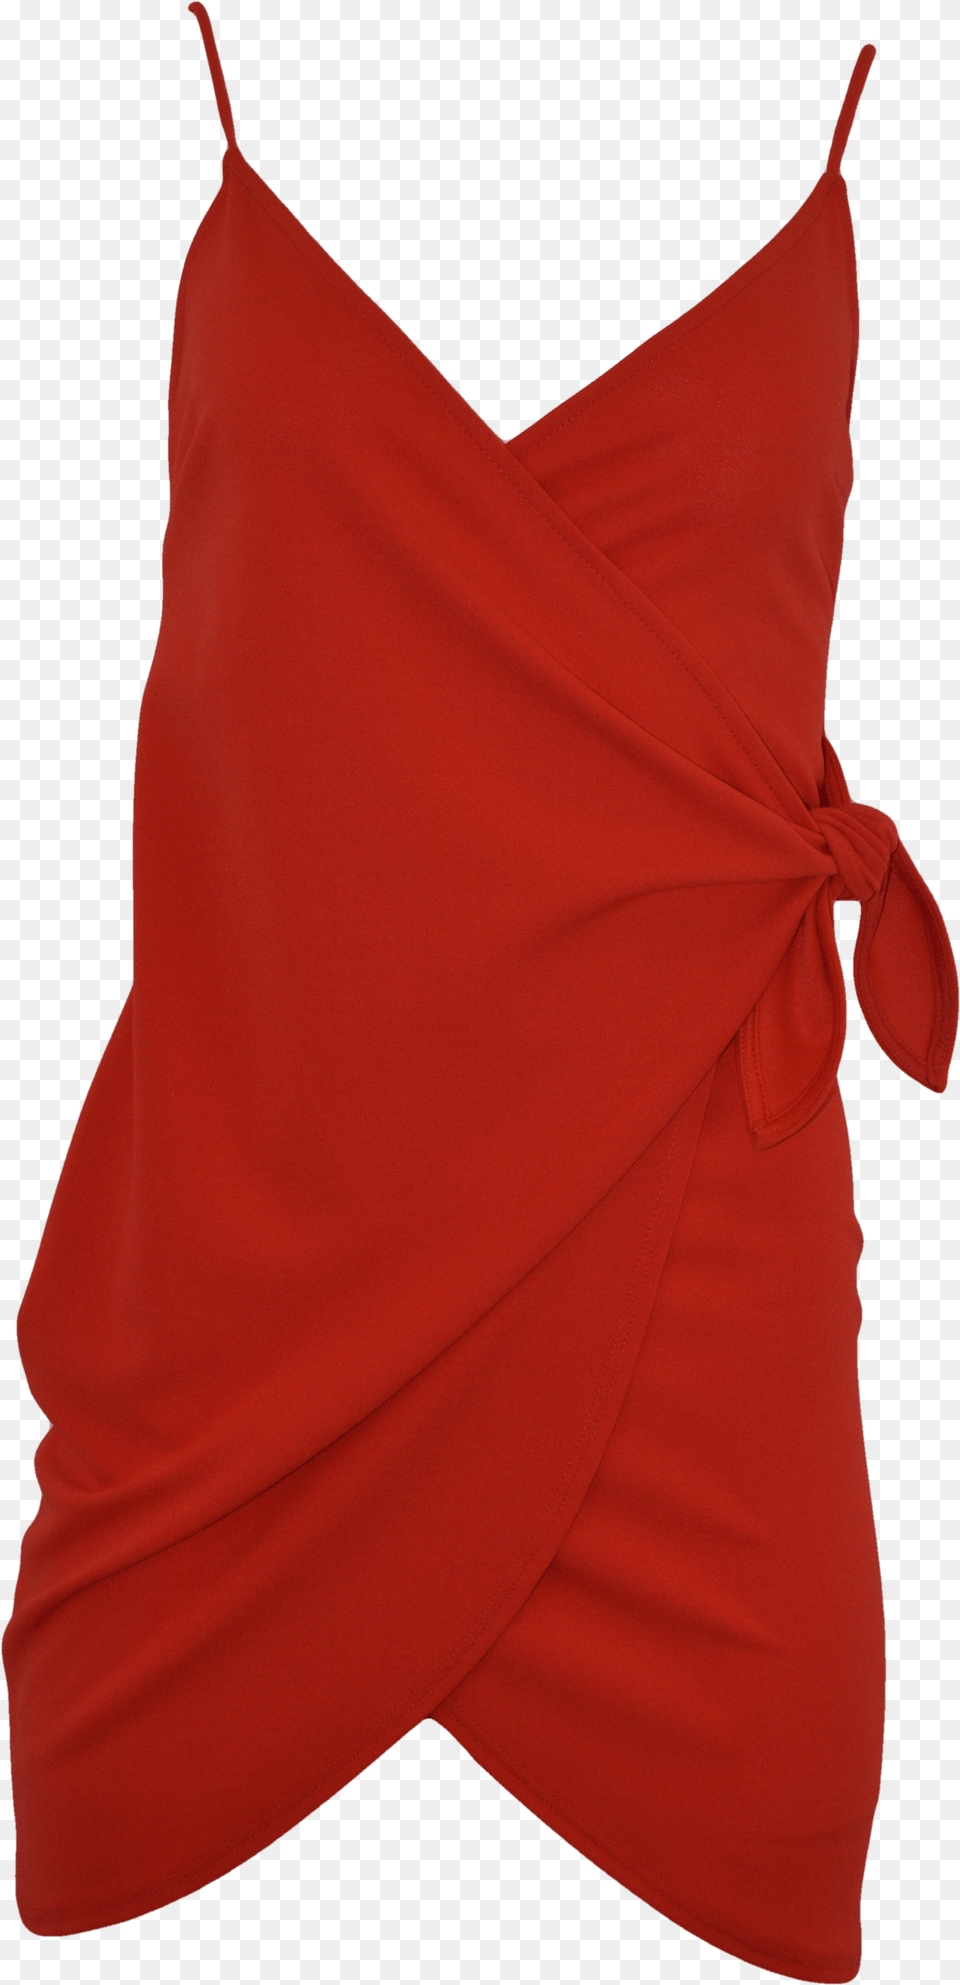 Red Dress Png Image